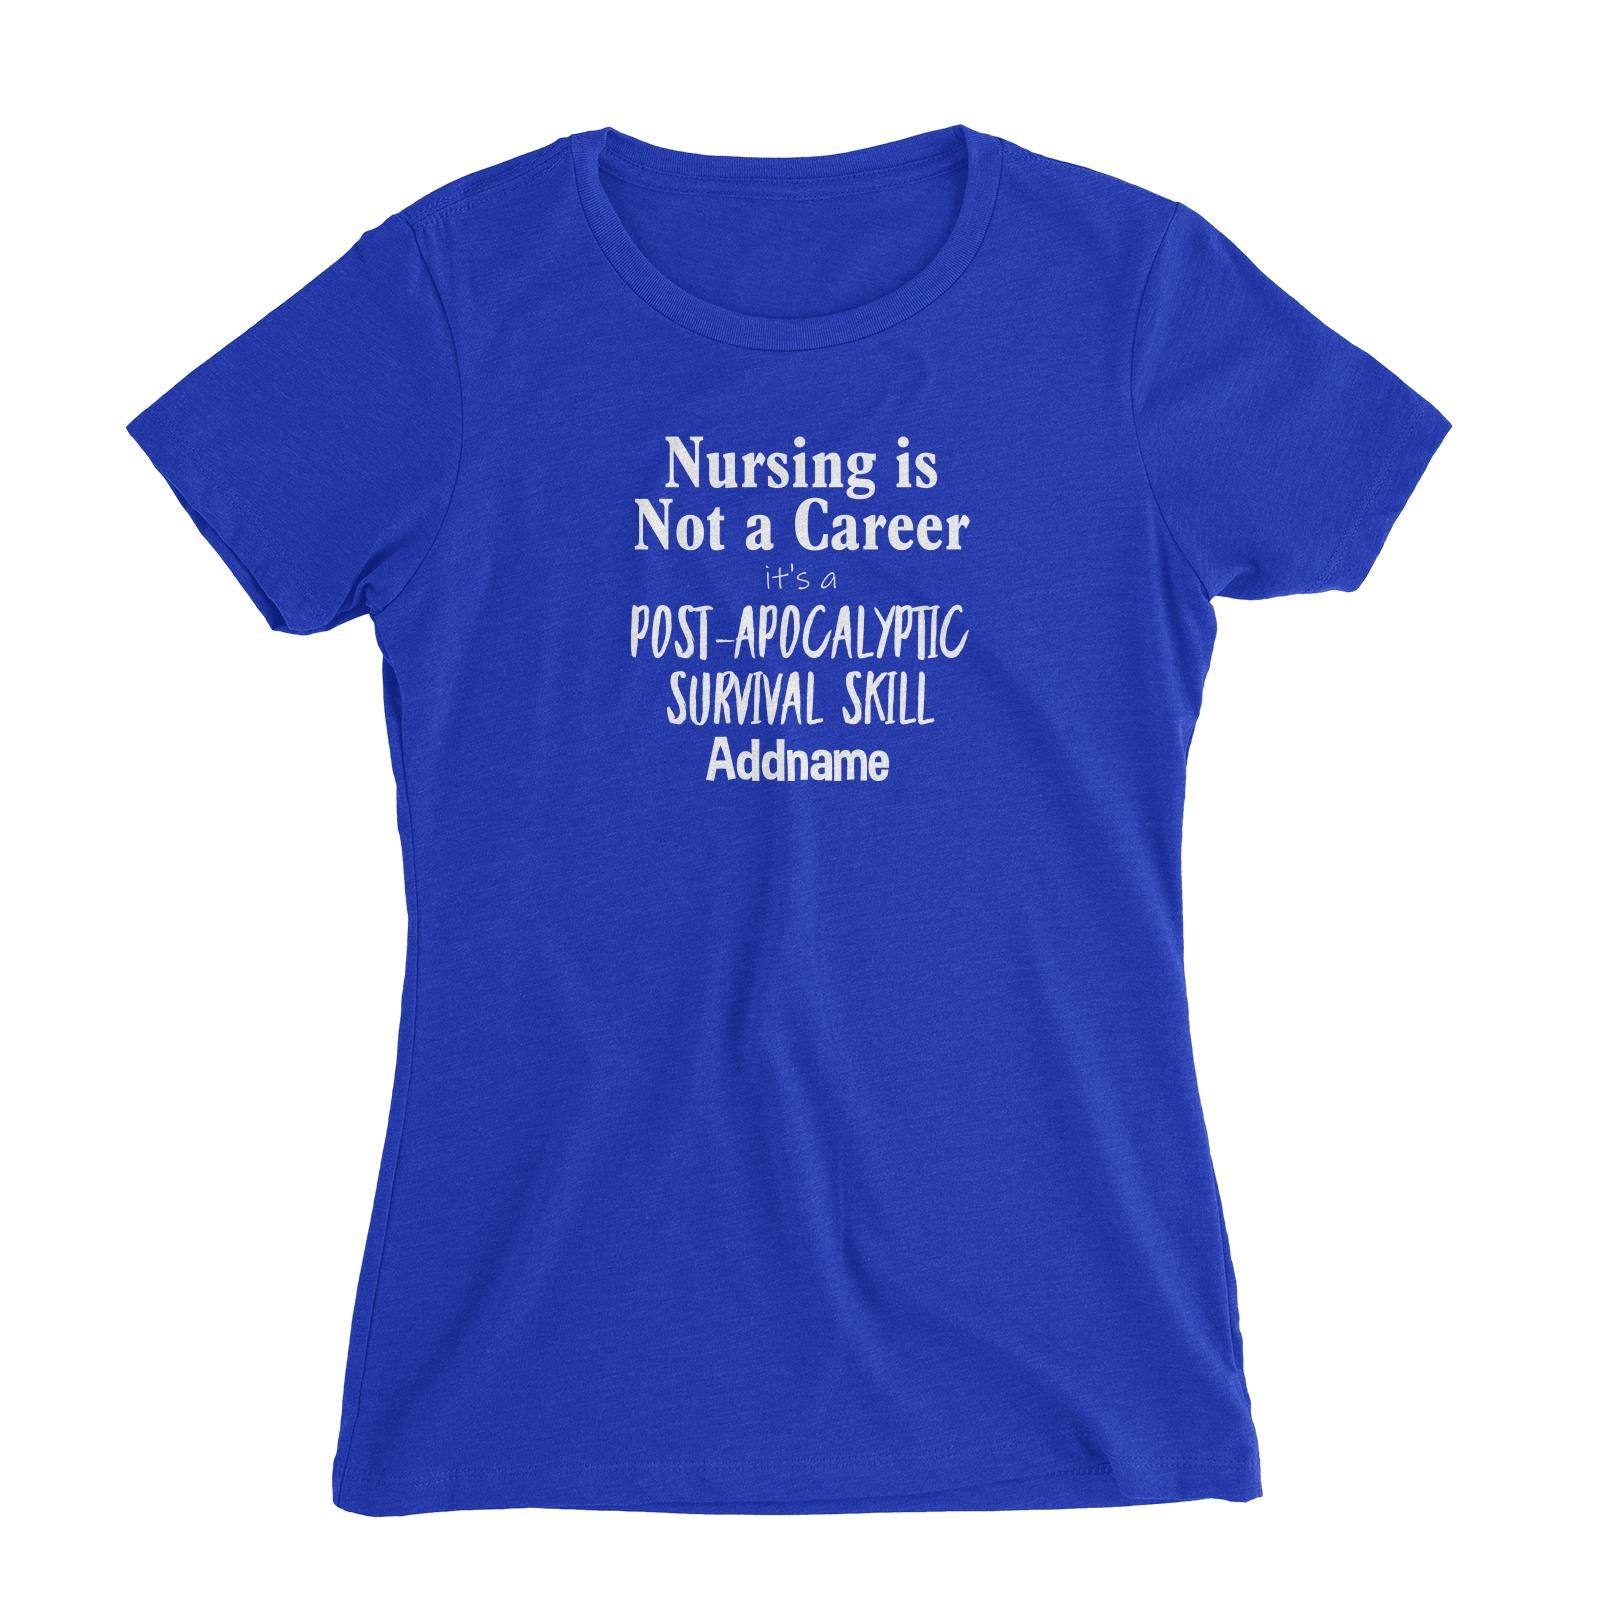 Nursing is Not a Career, It's a Post-Apocalyptic Survival Skill Women's Slim Fit T-Shirt